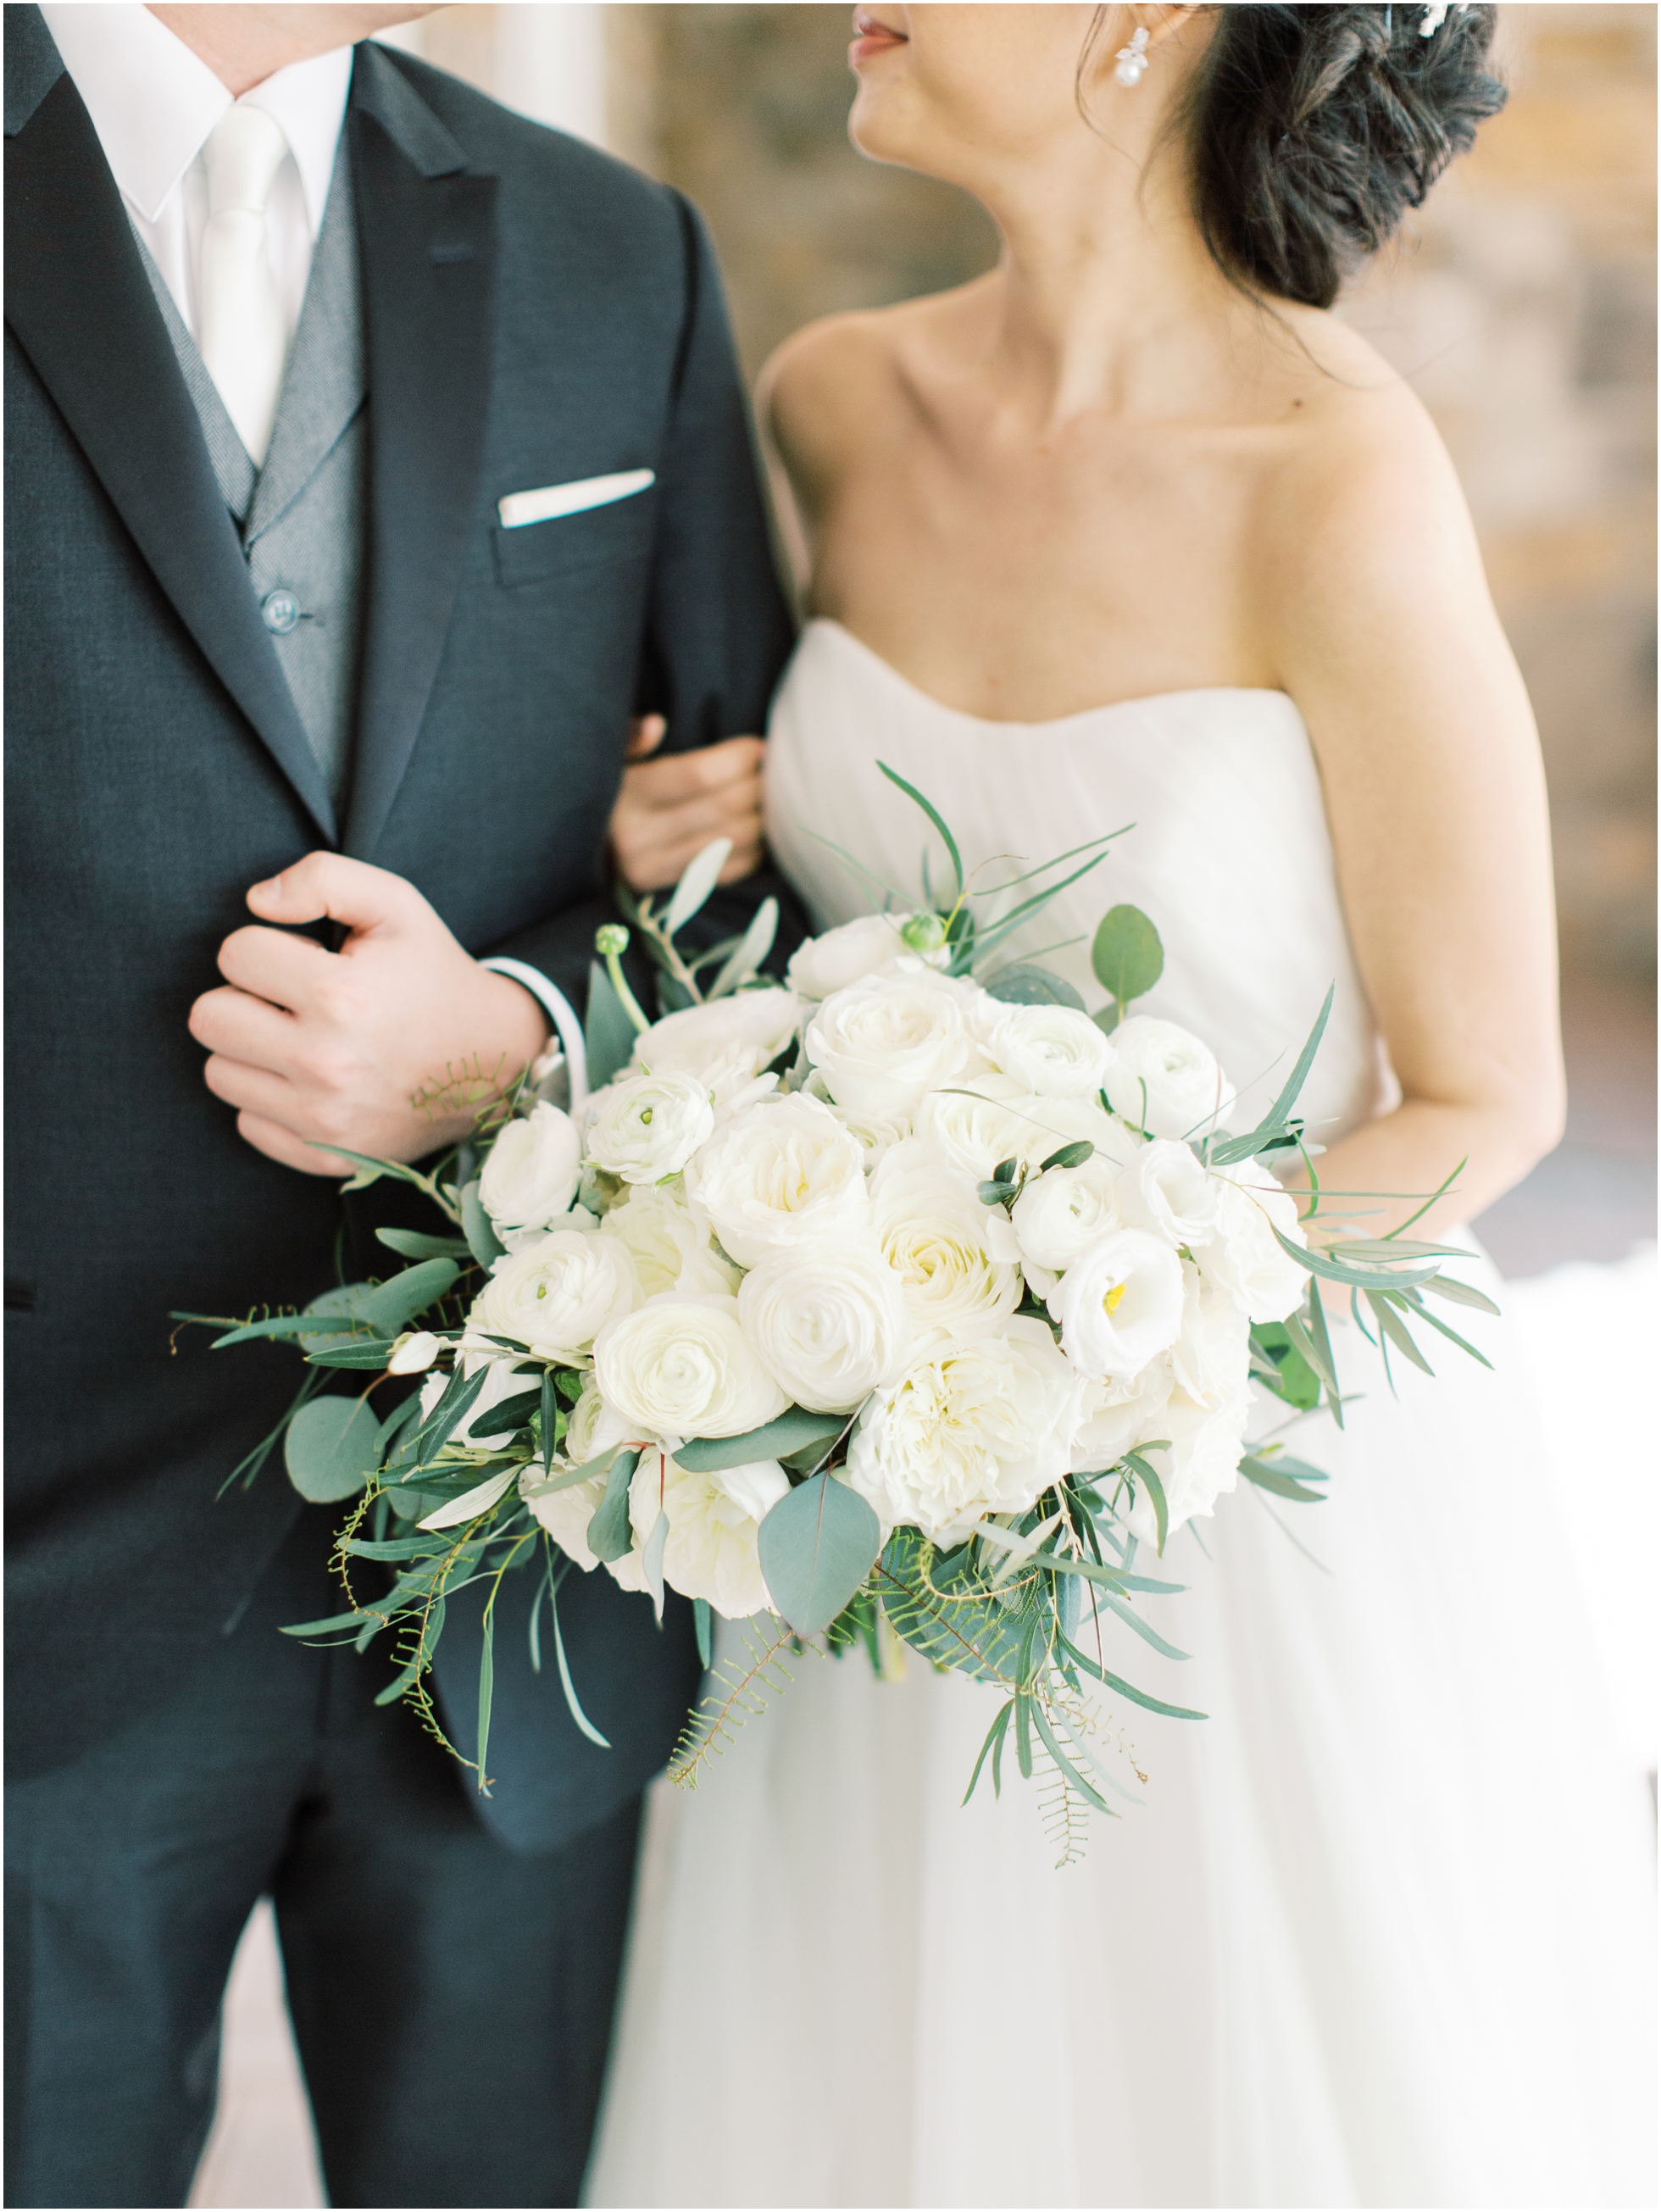 A Soft, Romantic Spring Wedding at the Piedmont Club